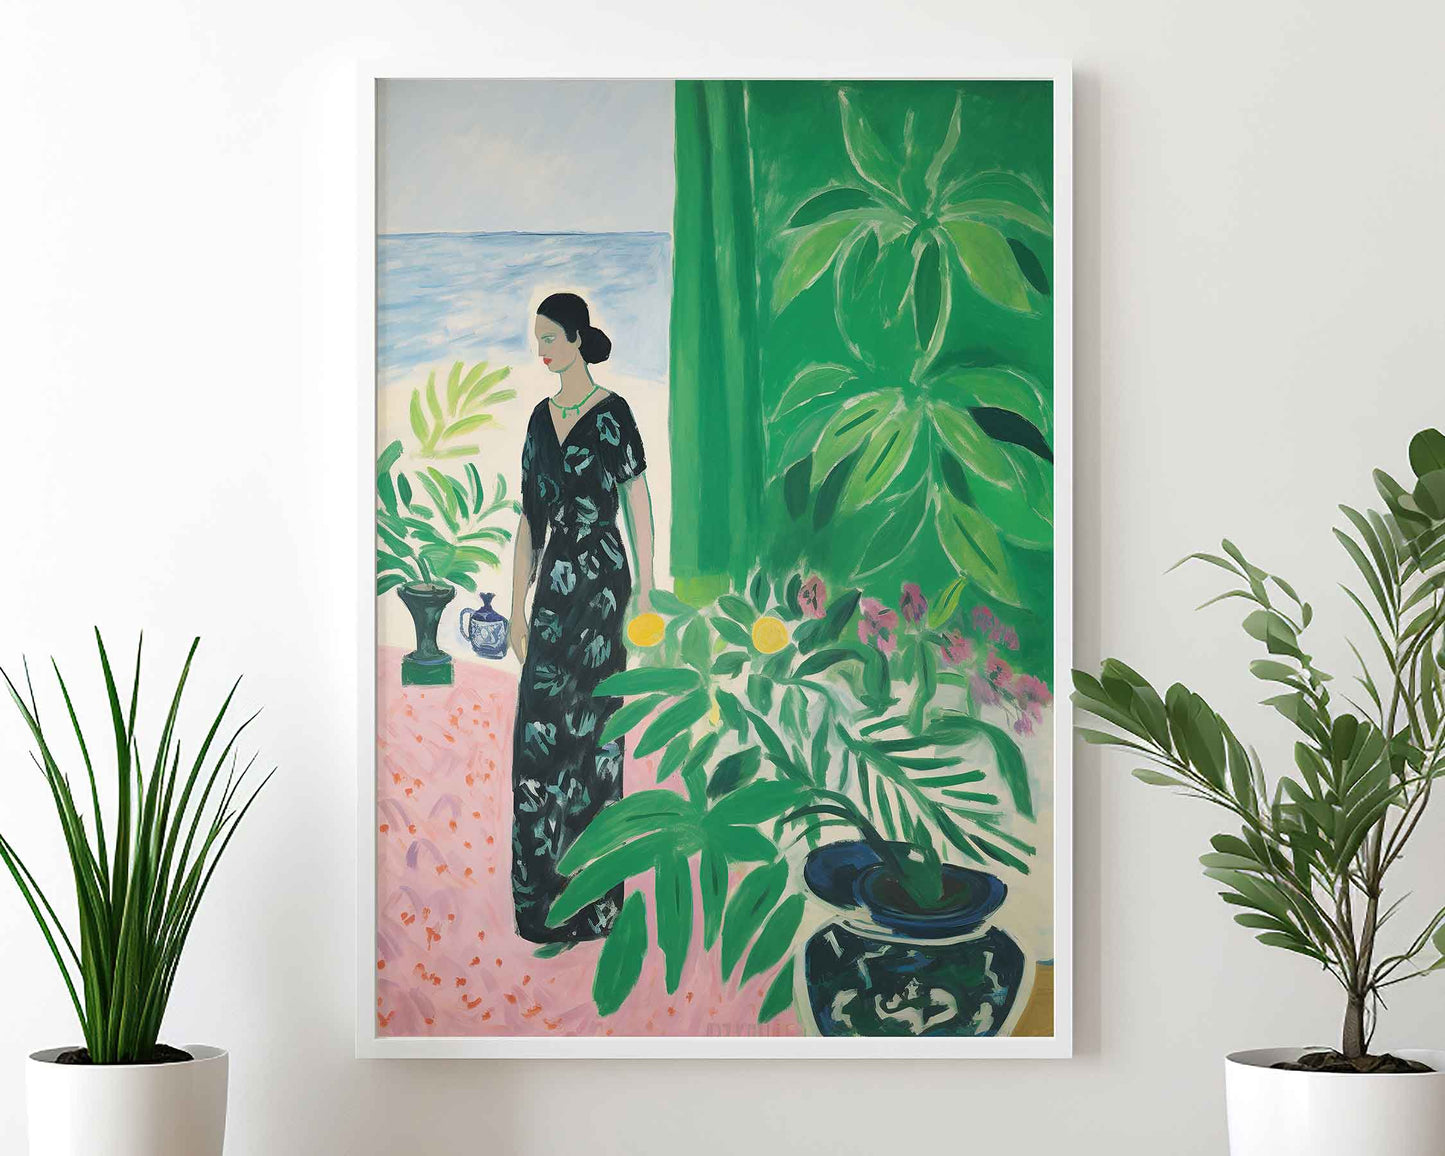 Framed Image of Matisse Wall Art Style Poster Print Green Themed Oil Paintings